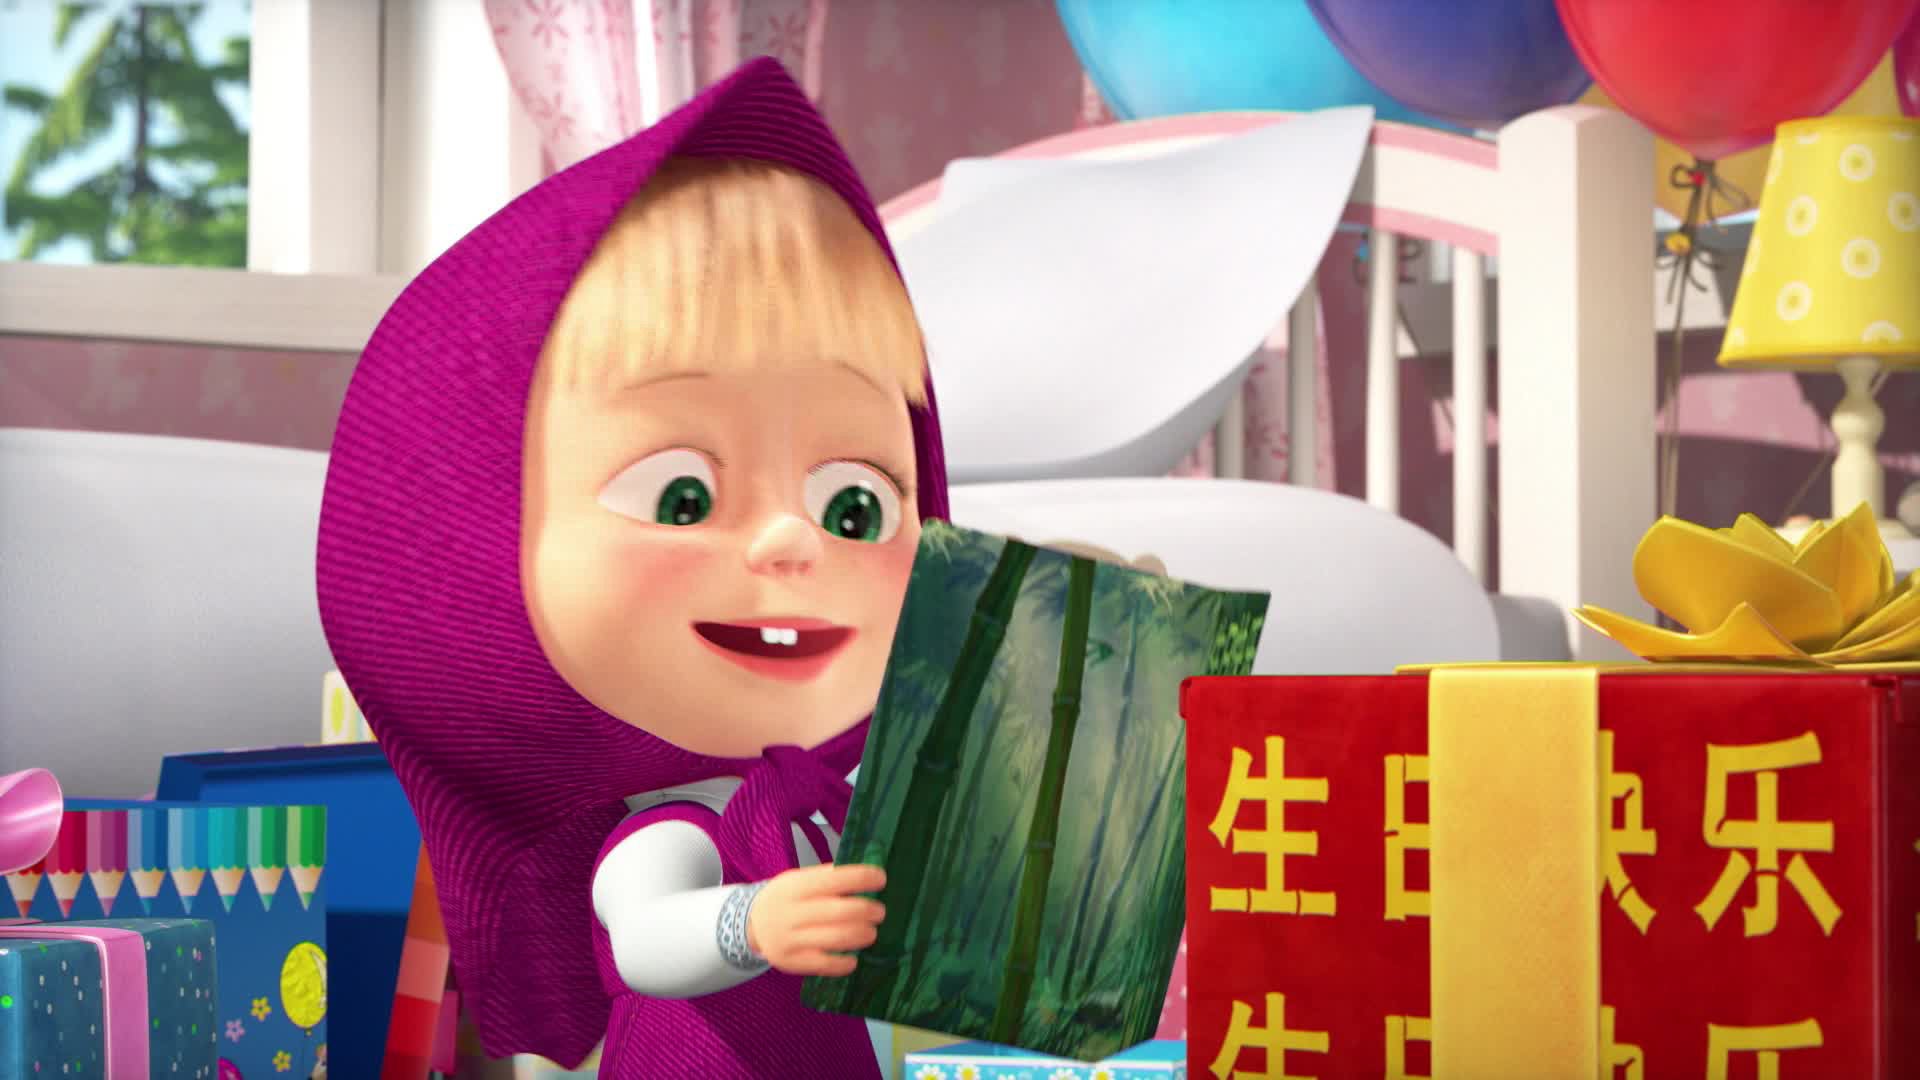 Watch Masha And The Bear Season 3 Episode 8 At Your Service Watch Full Episode Onlinehd On 